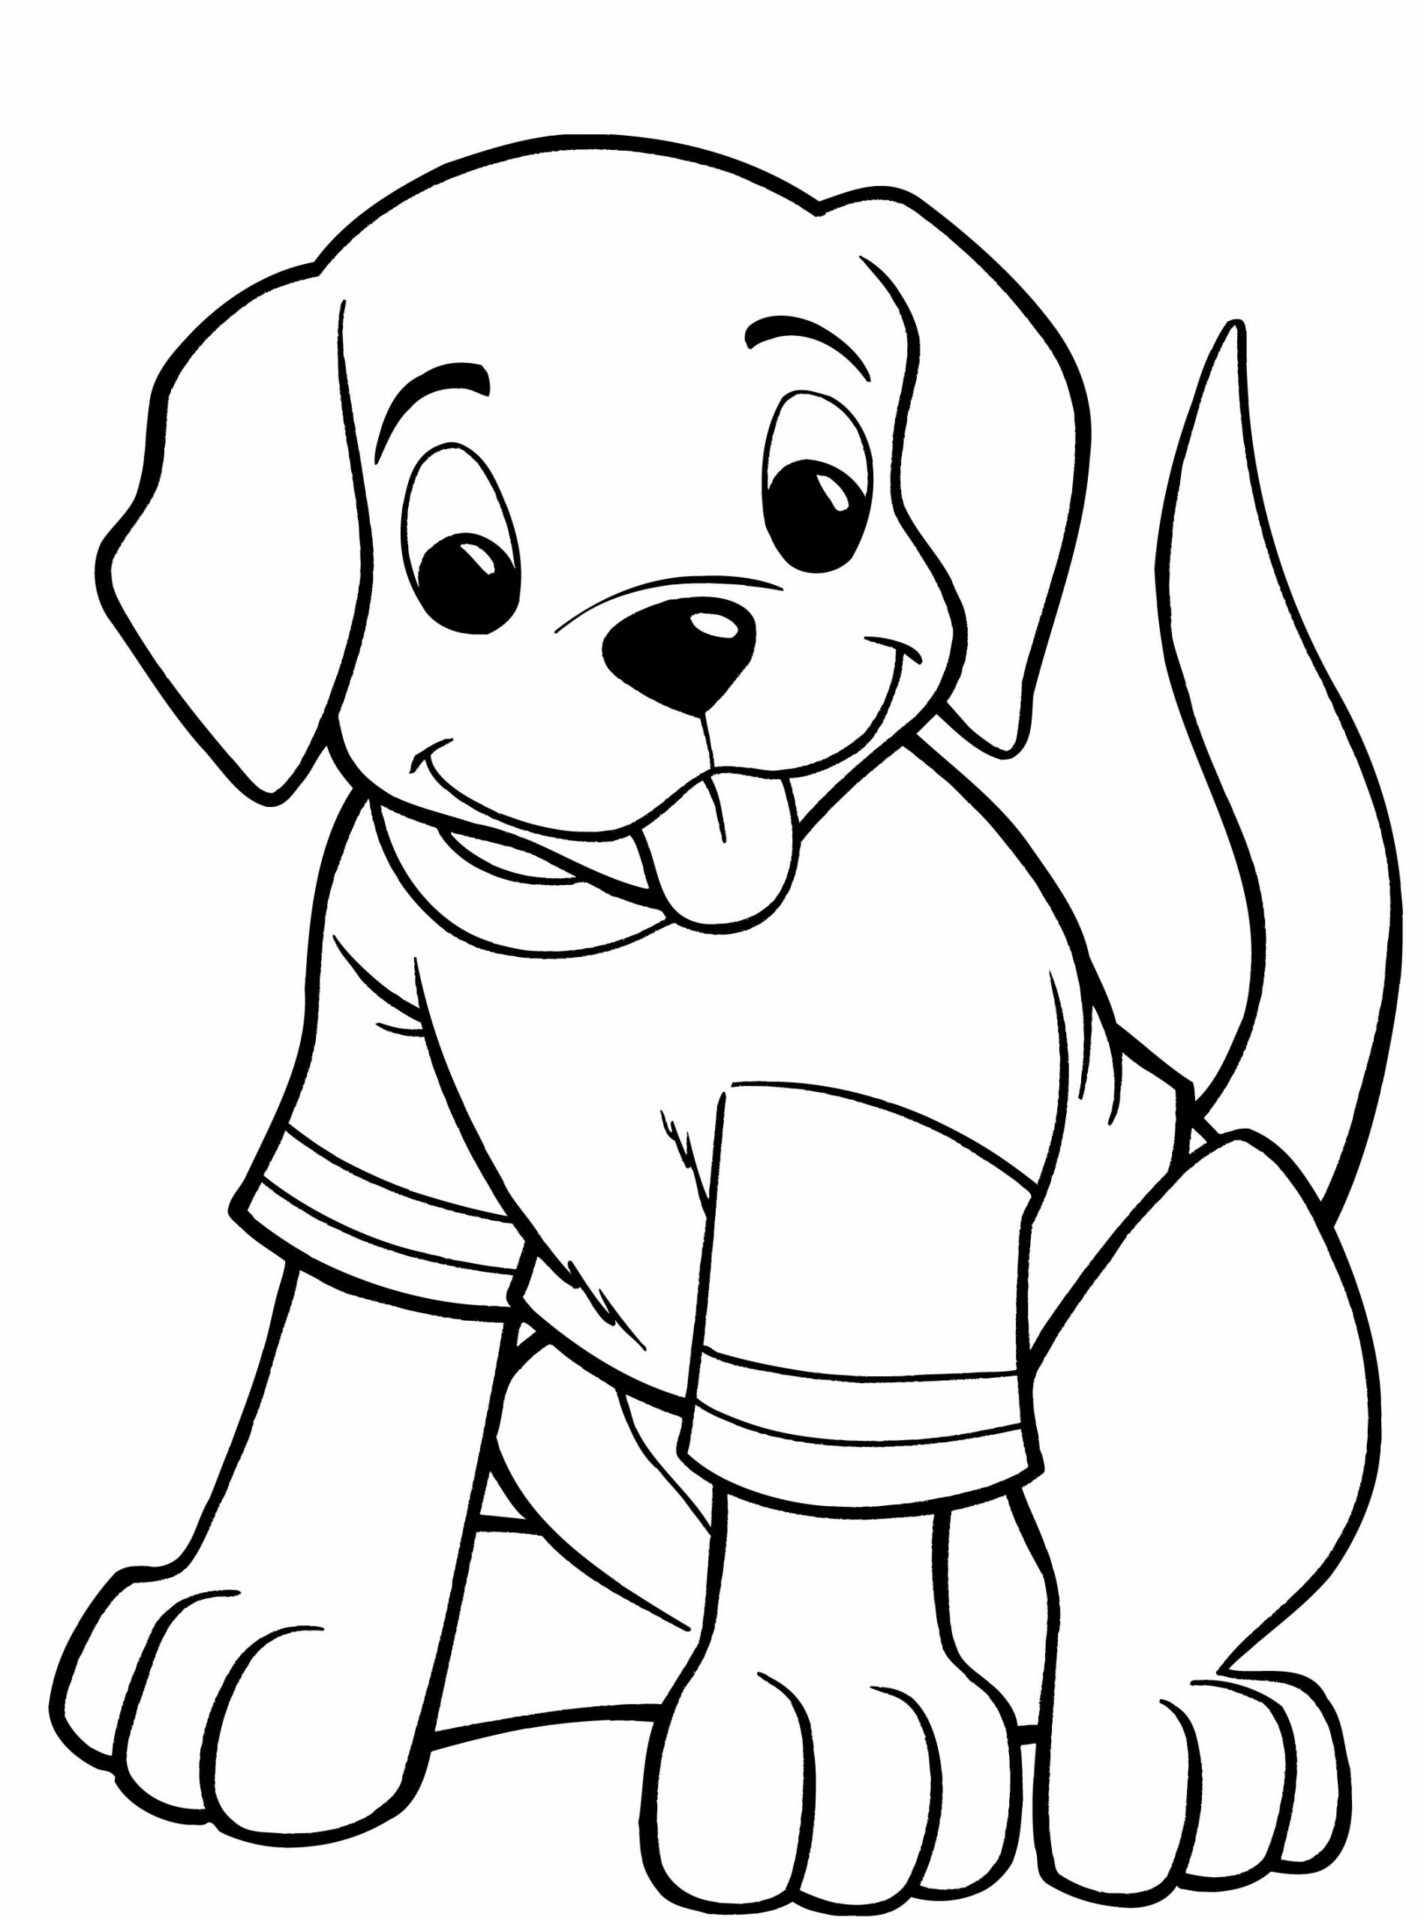 puppy wearing t shirt coloring page free printable coloring pages for kids